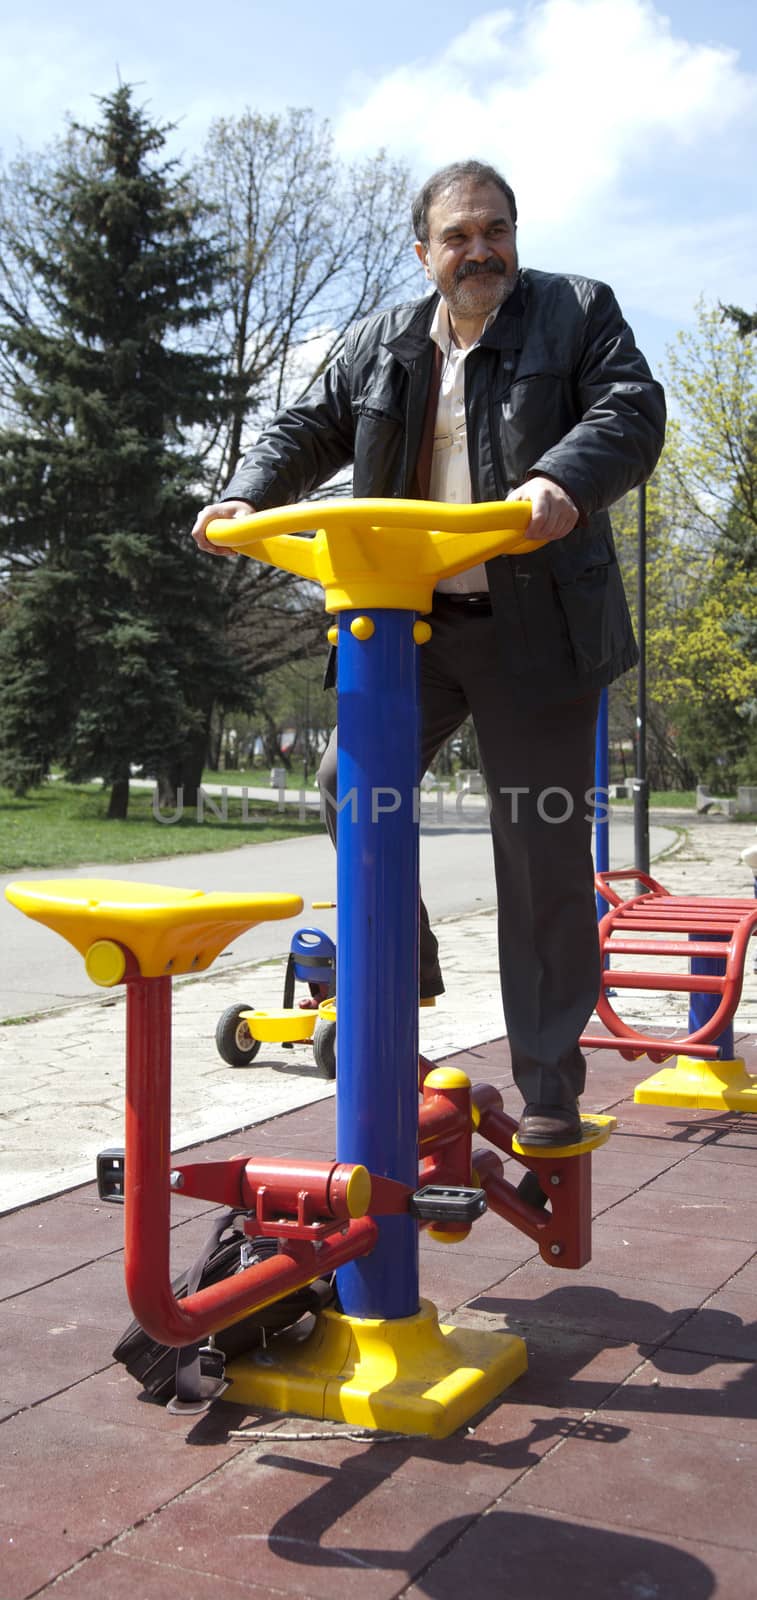 Adult man exercising on colourful fitness machine in park